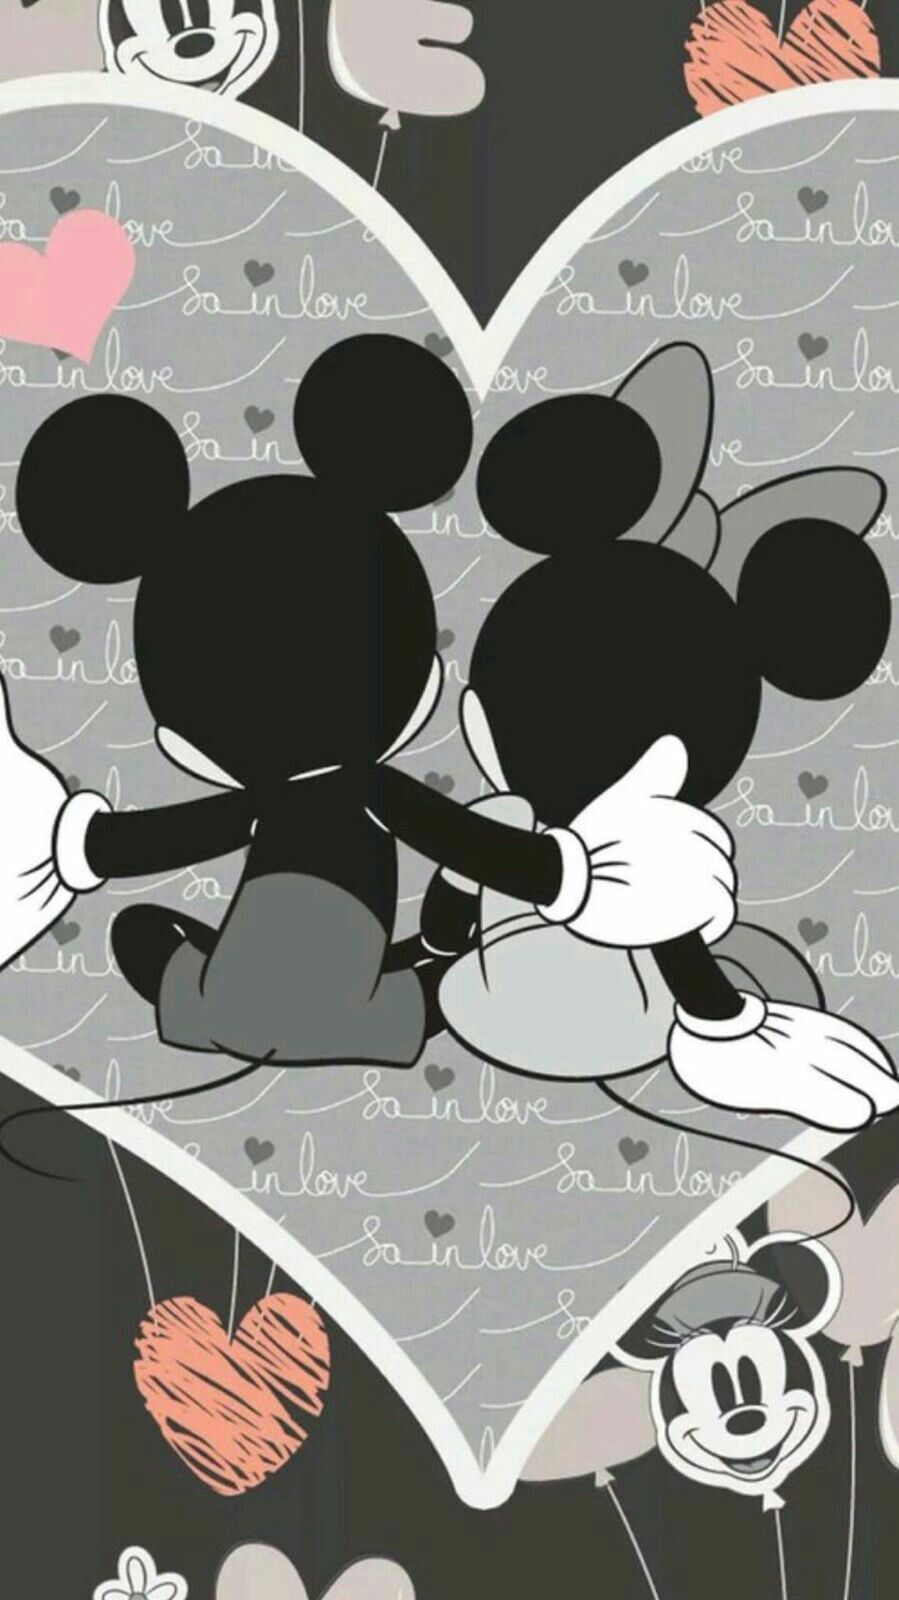 Mickey Minnie Mouse Iphone Wallpapers